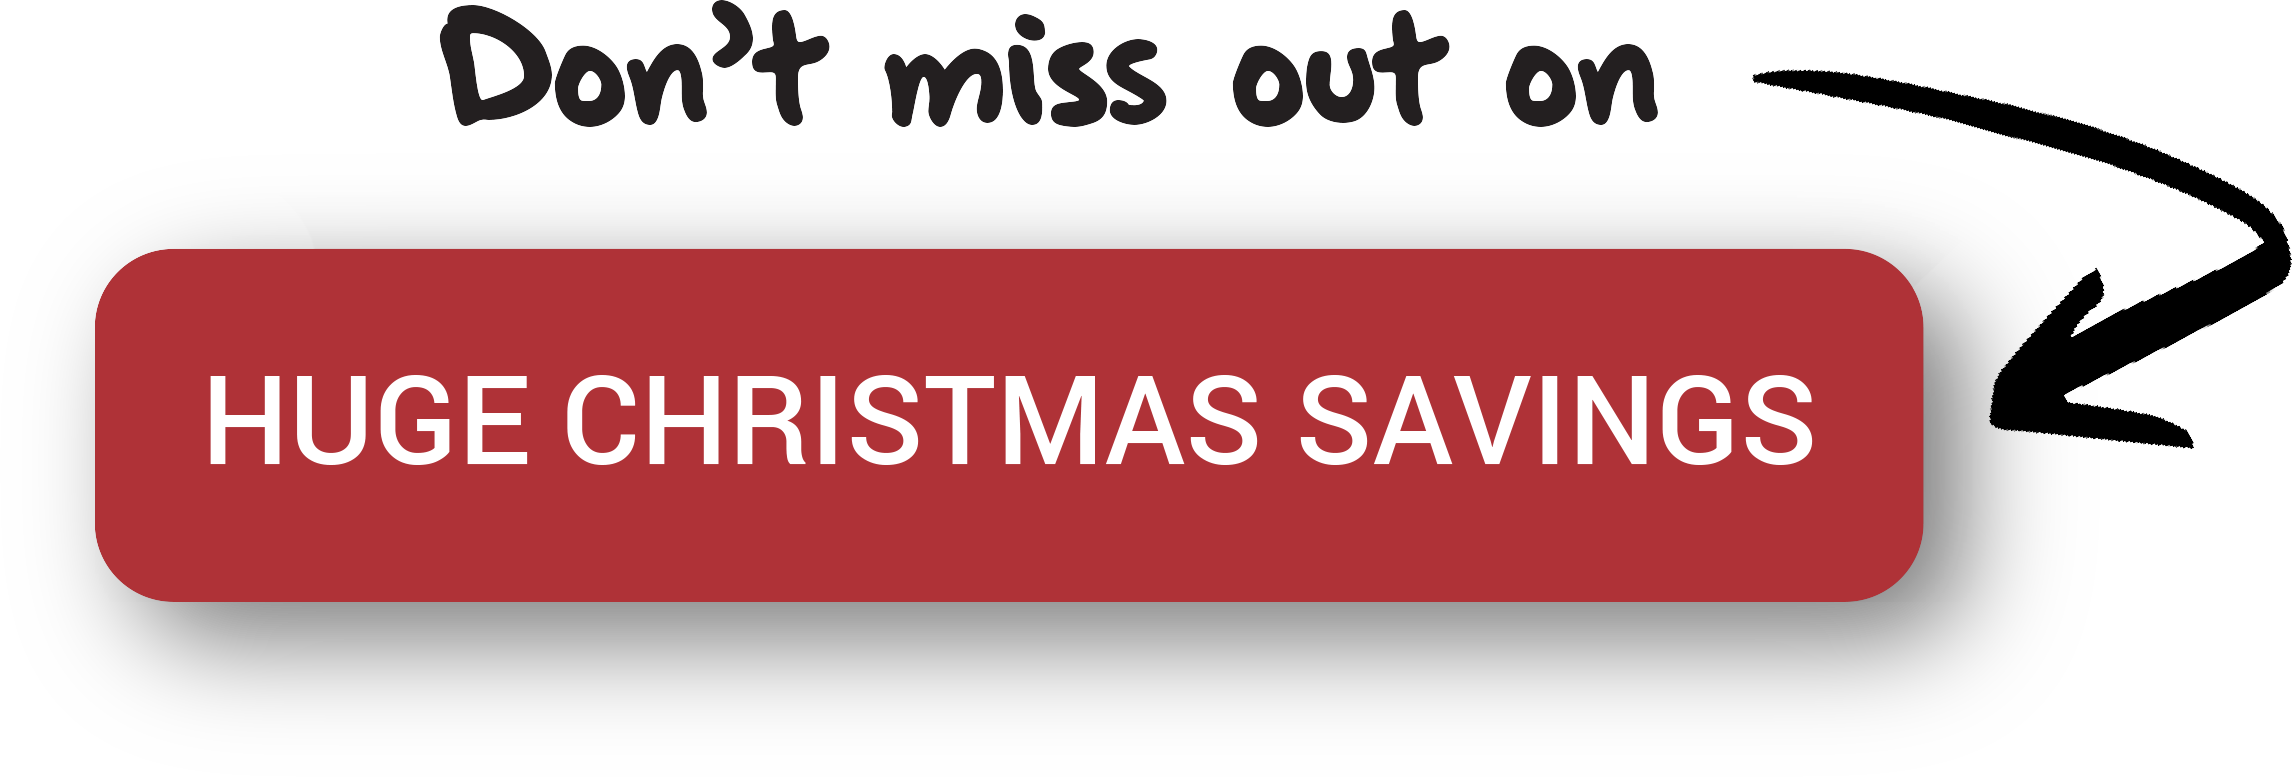 "Don't miss out on huge Christmas savings" button